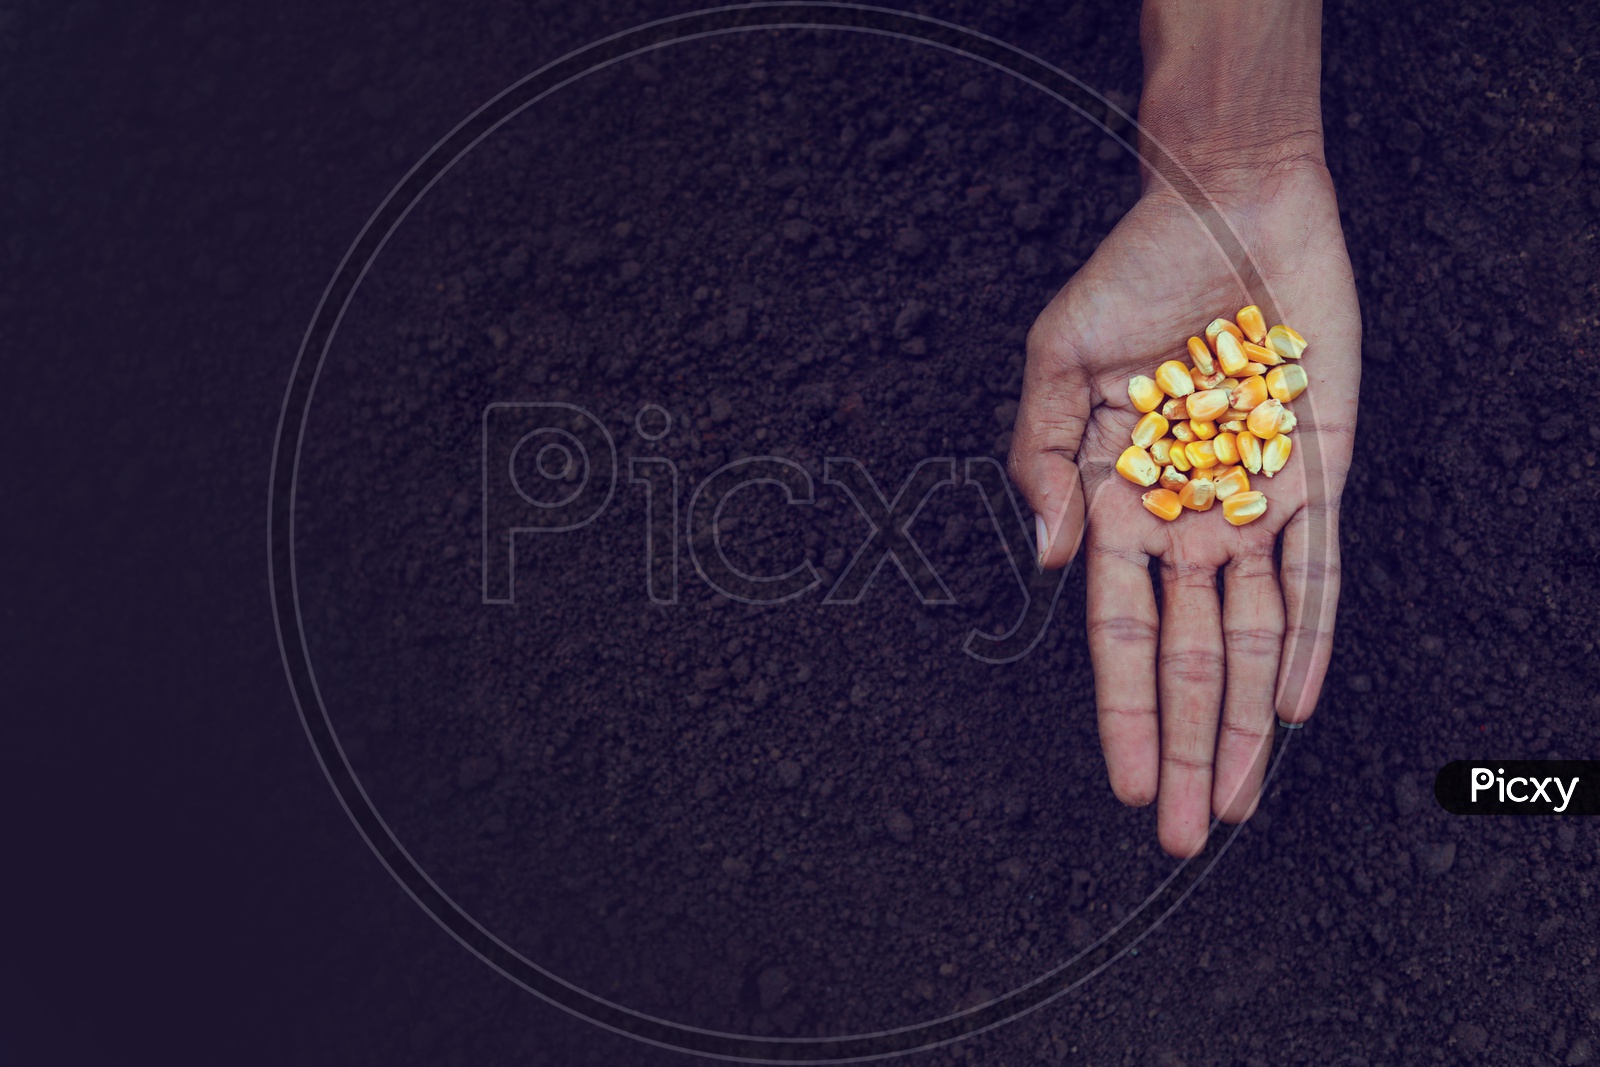 Maize / Corn Seeds in a Farmers Hand For Seeding in Soil